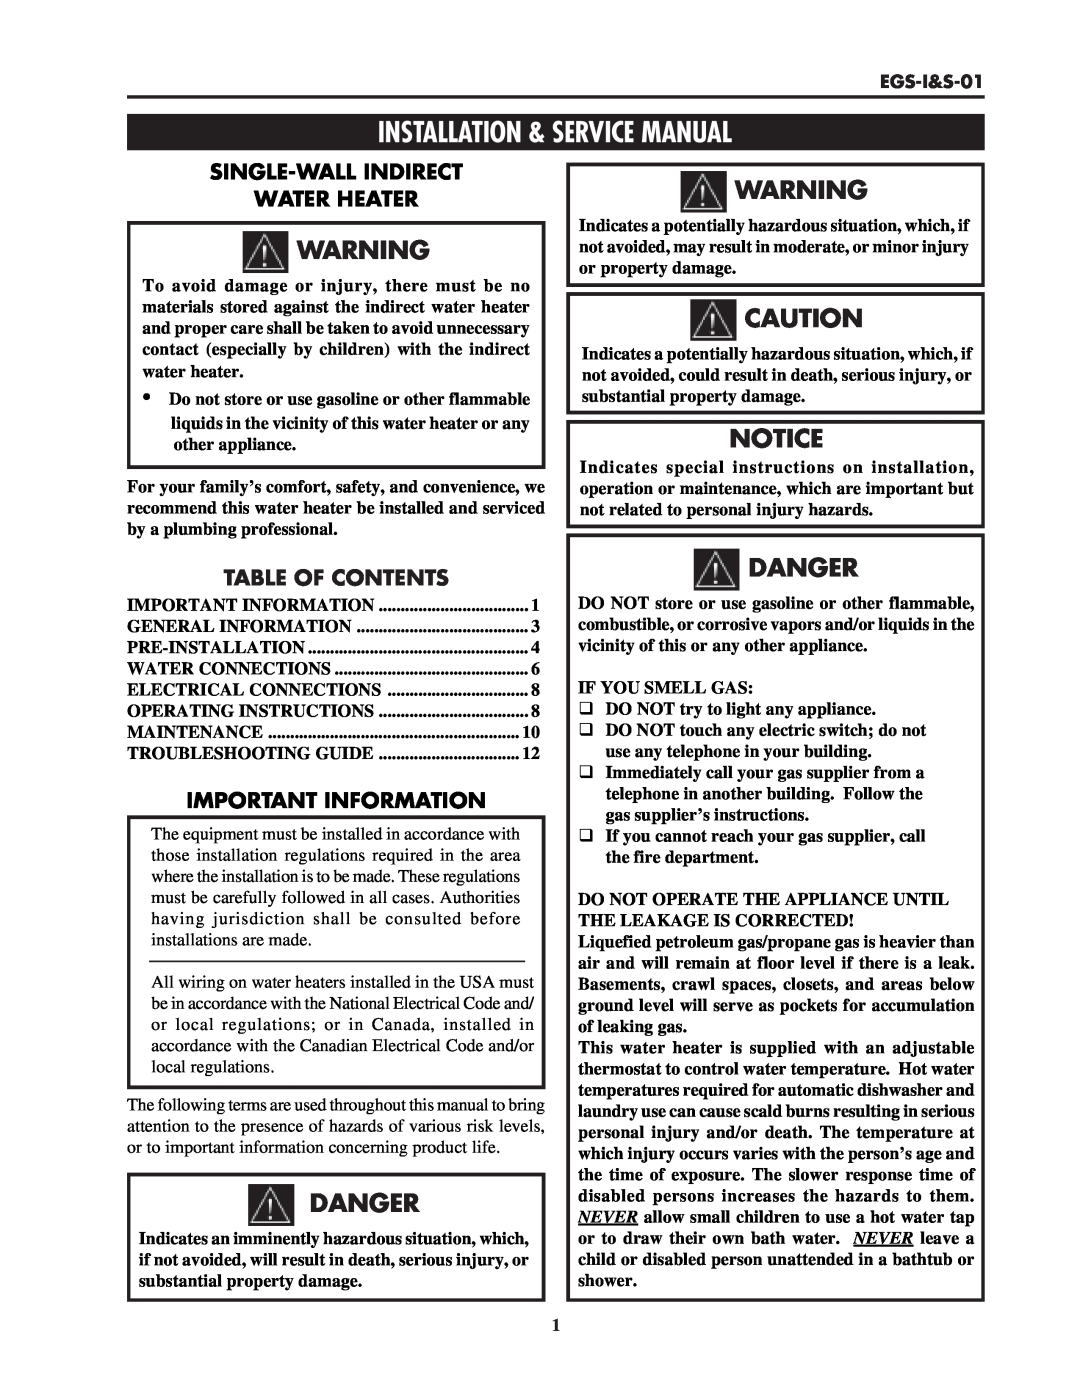 Lochinvar EGS-I&S-01 service manual Danger, Single-Wallindirect Water Heater, Important Information, Table Of Contents 